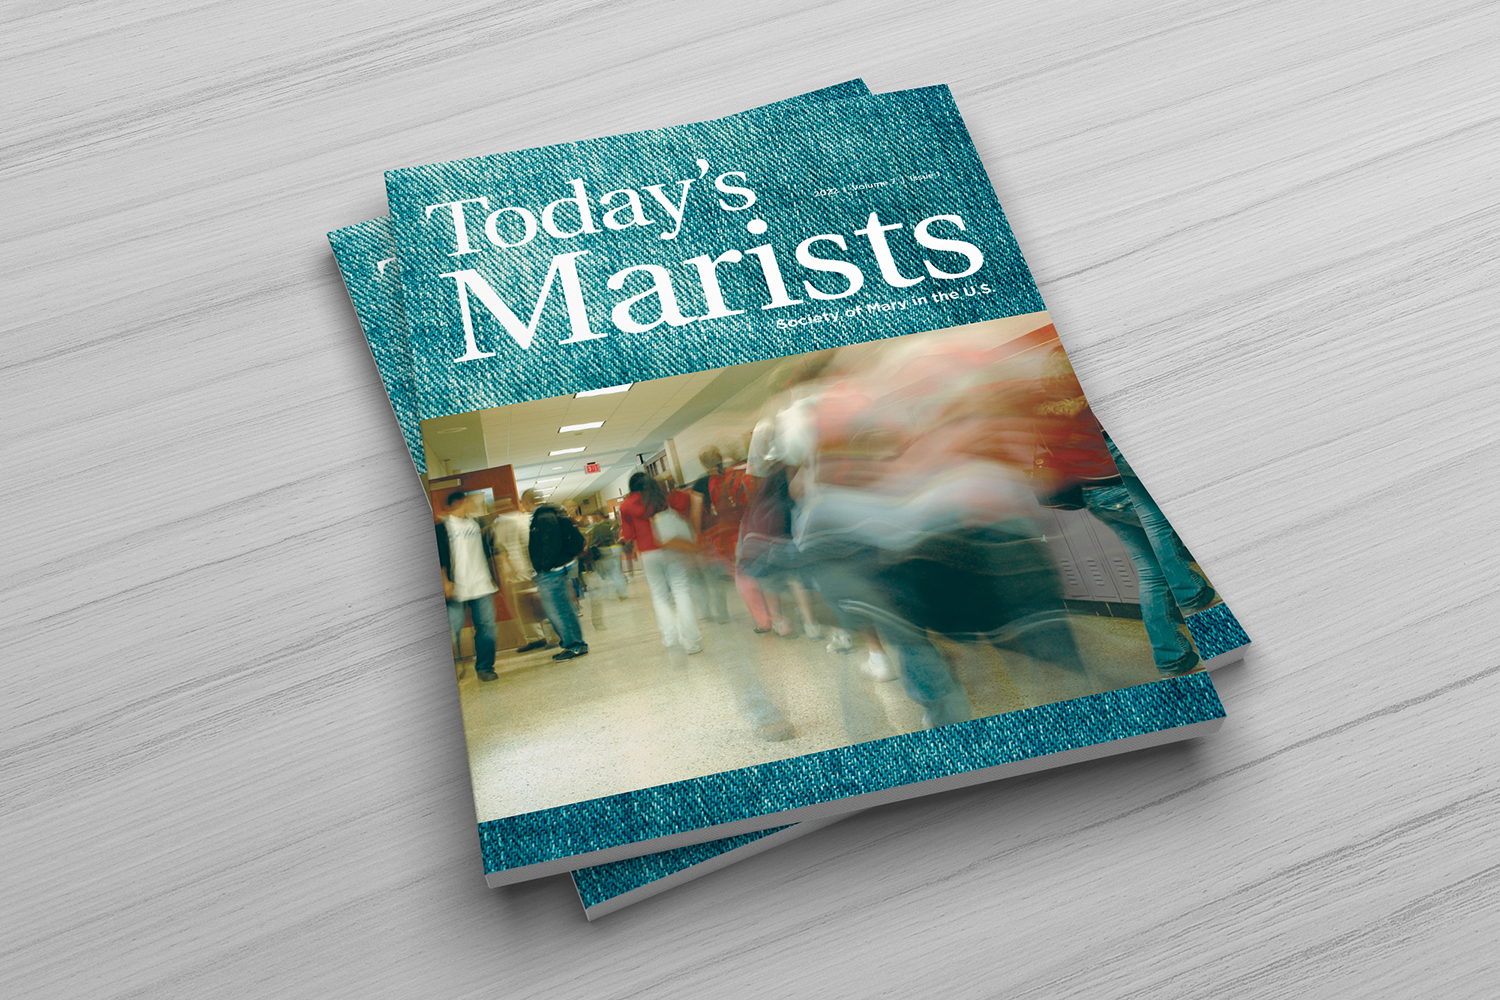 Today's Marist cover